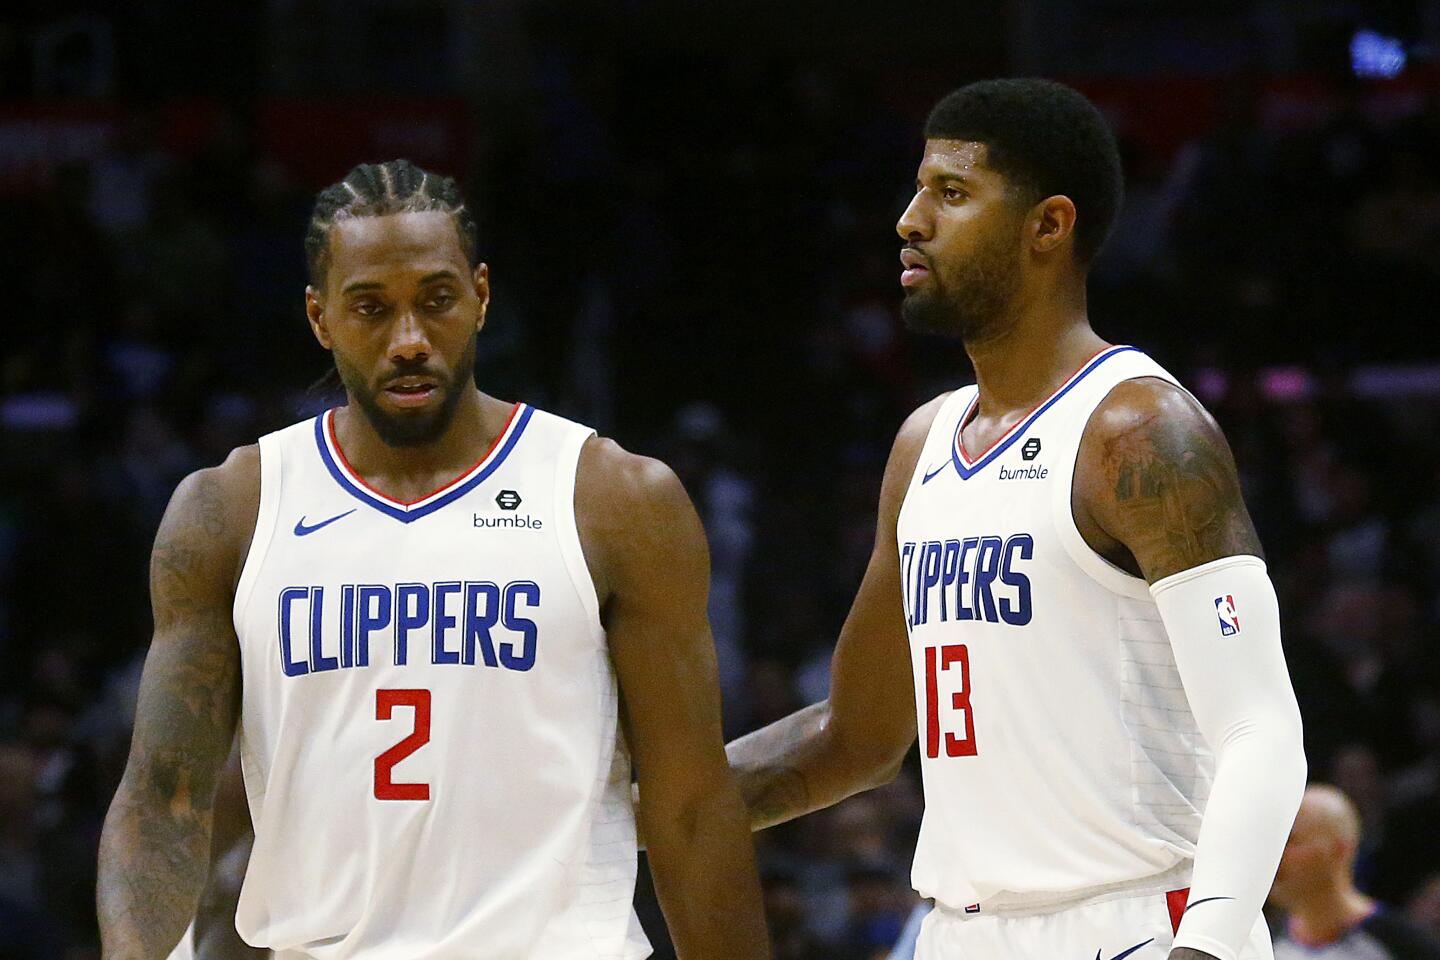 Paul George is LA Clippers' key ingredient to championship hopes